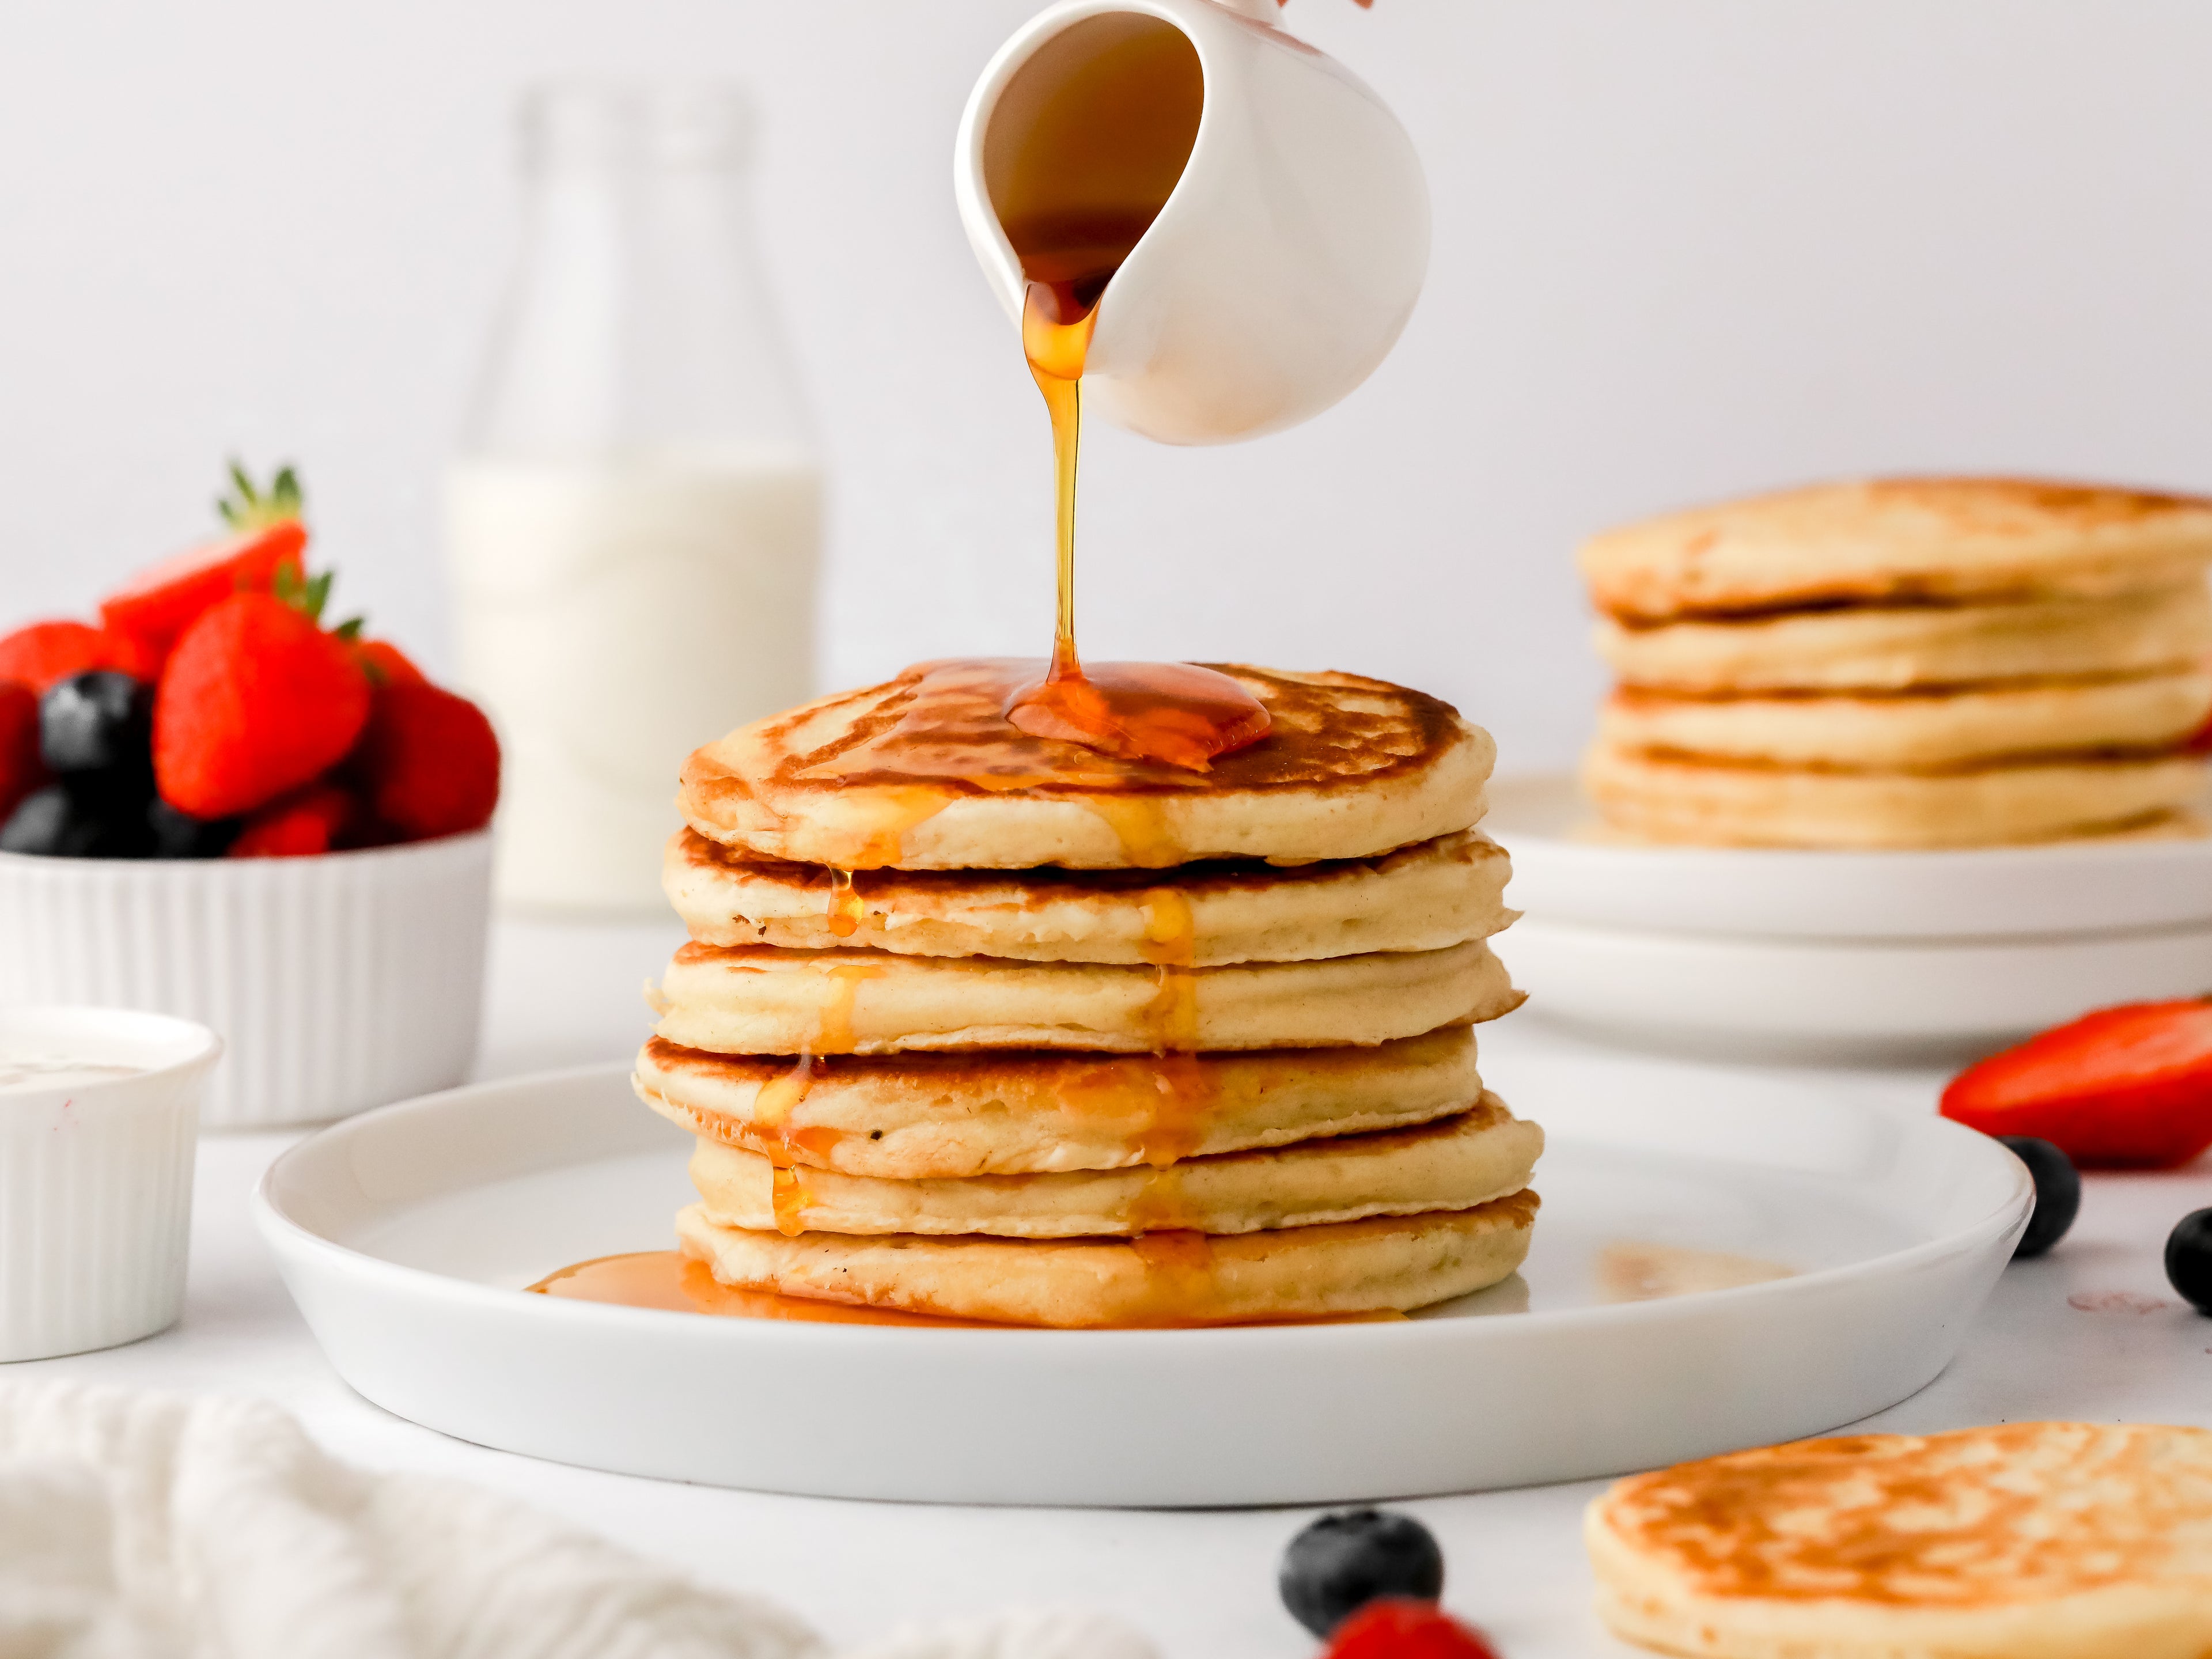 Syrup being poured on top of a stack of pancakes